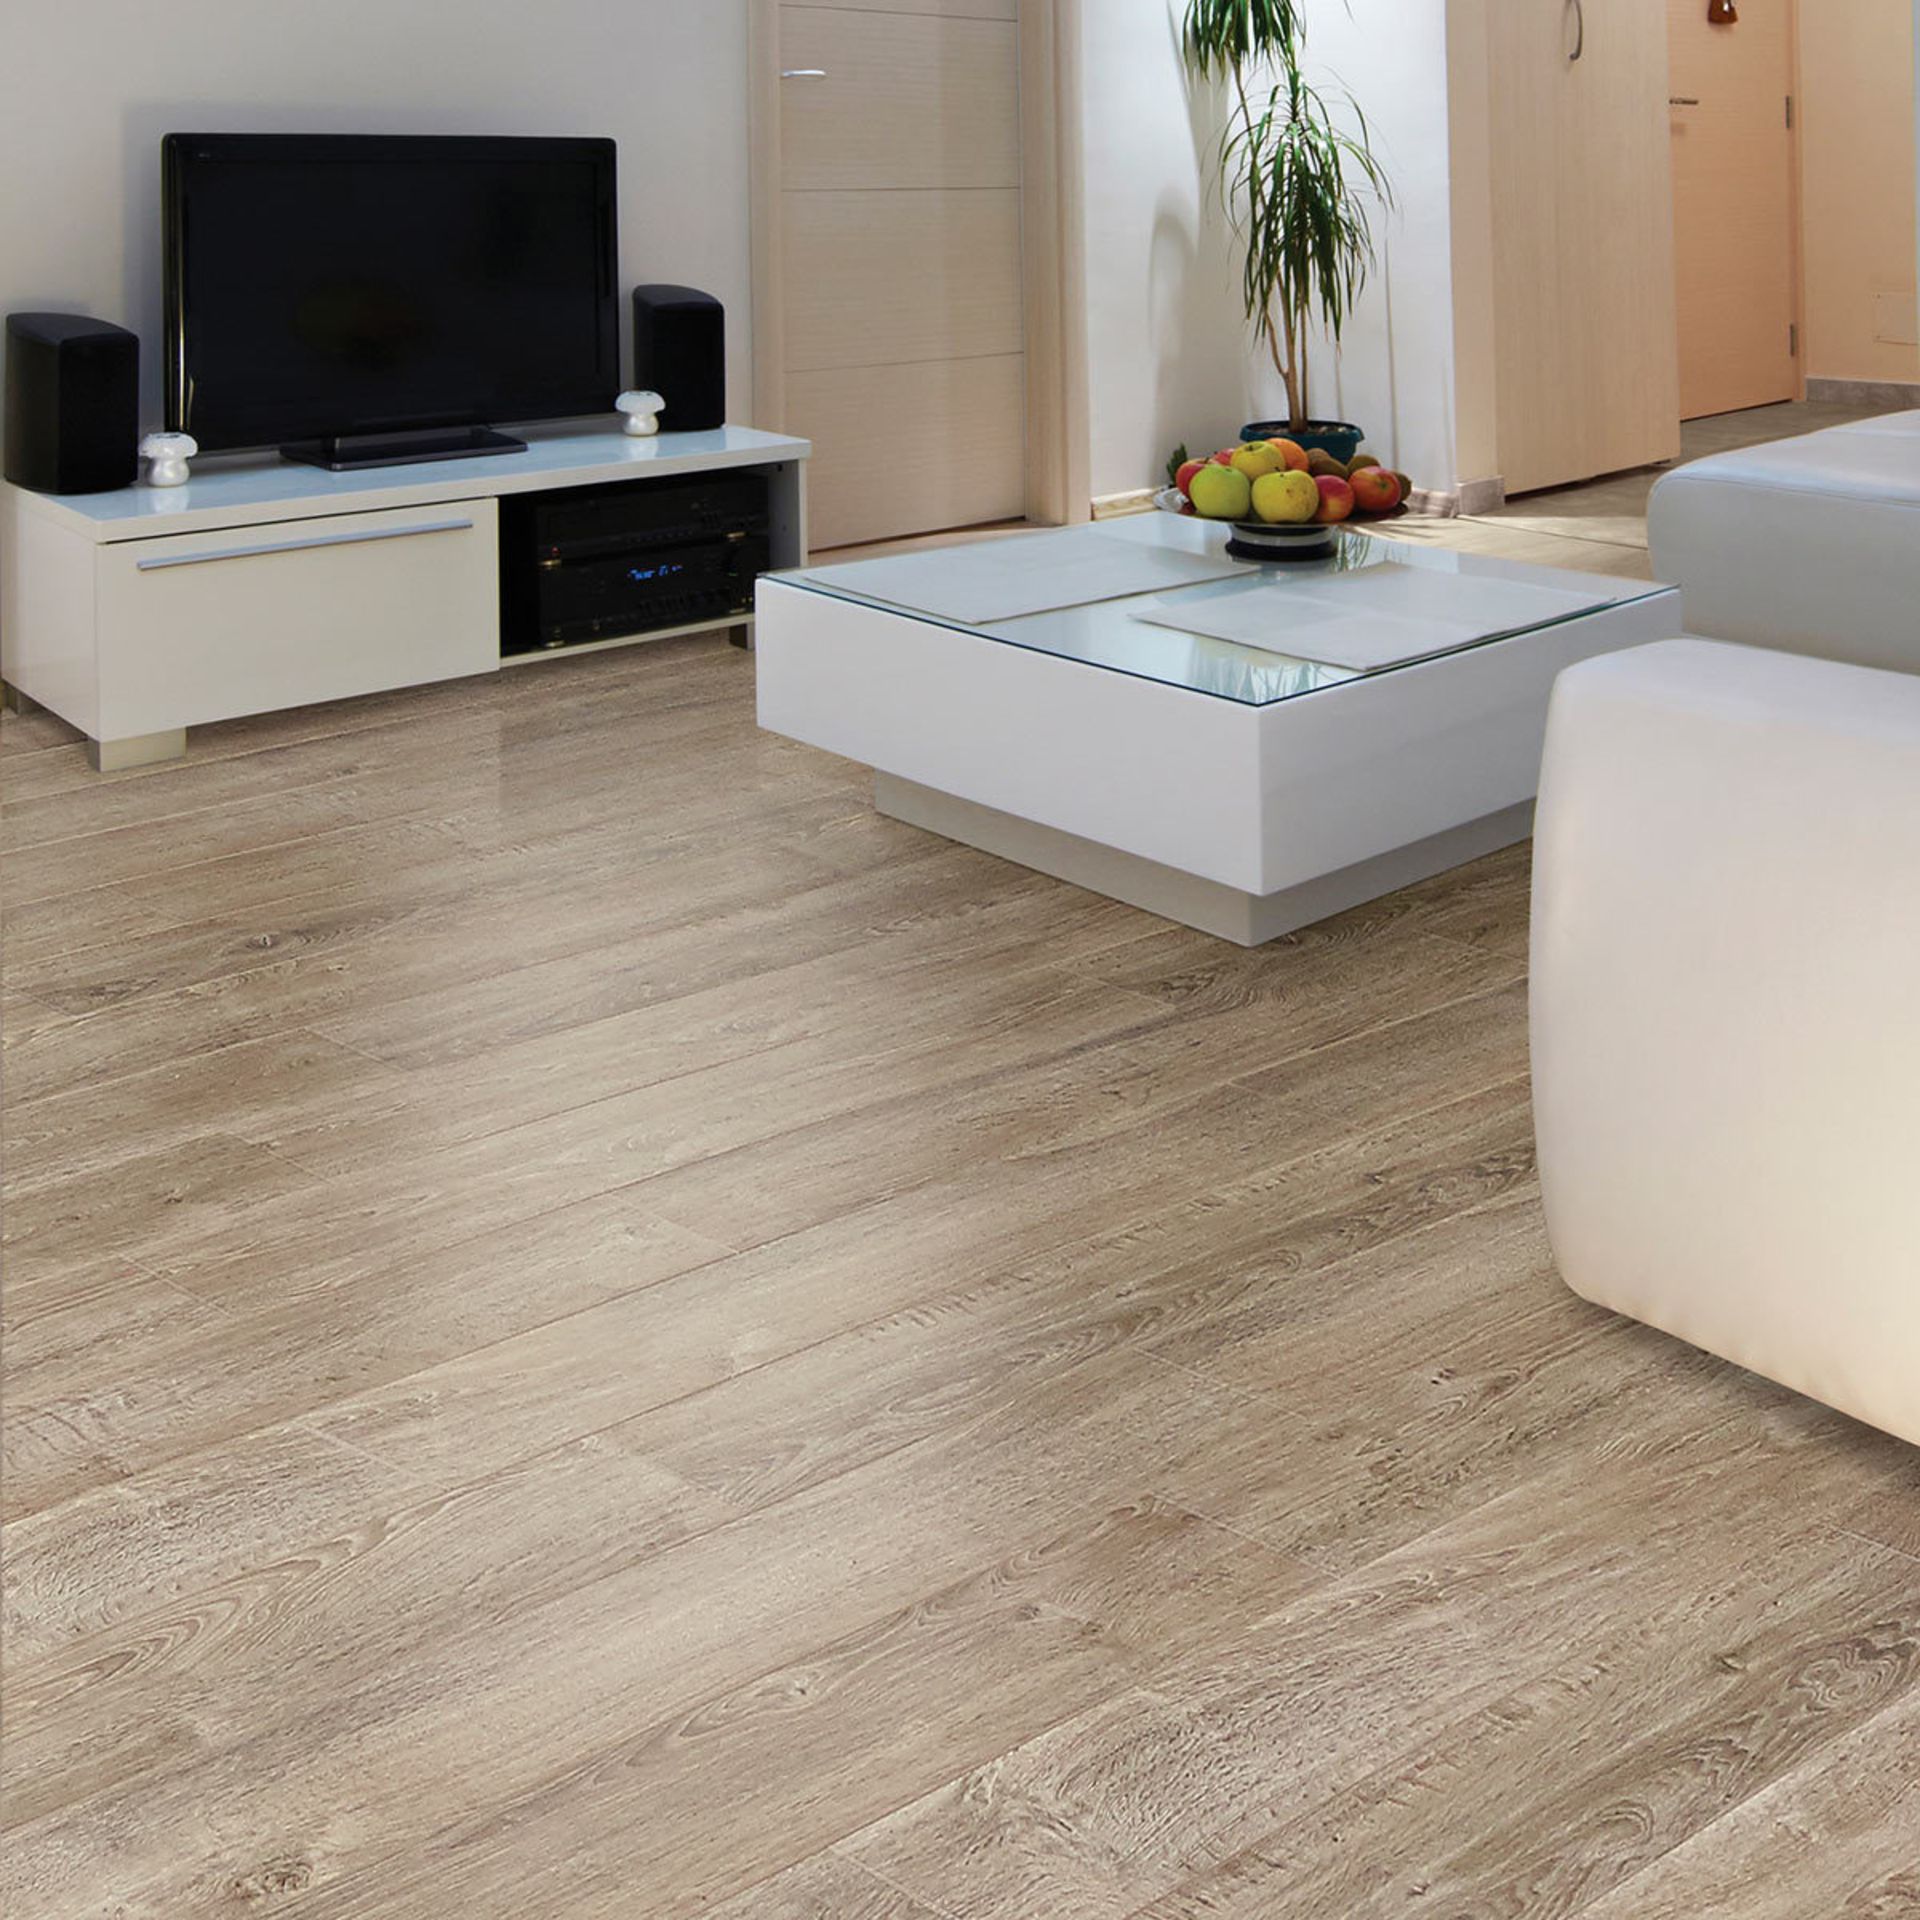 1 BOXED GOLDEN SELECT LAMINATE FLOORING IN PROVIDENCE GREY (COVERS APPROXIMATELY 1.162m2 PER BOX)